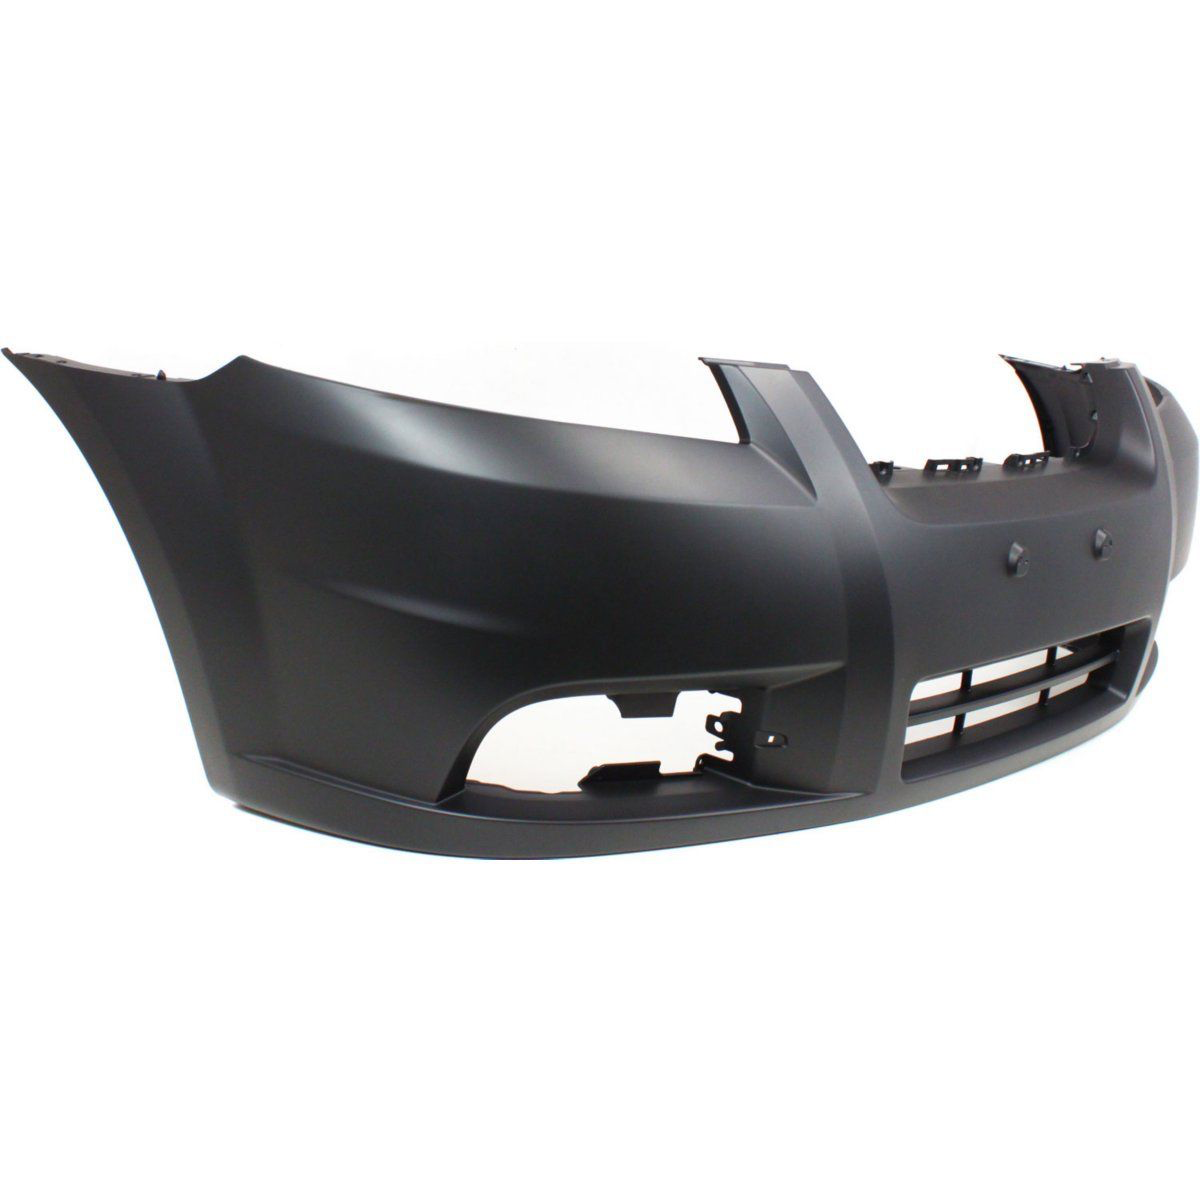 2007-2011 CHEVY AVEO Front Bumper Cover 4dr sedan Painted to Match